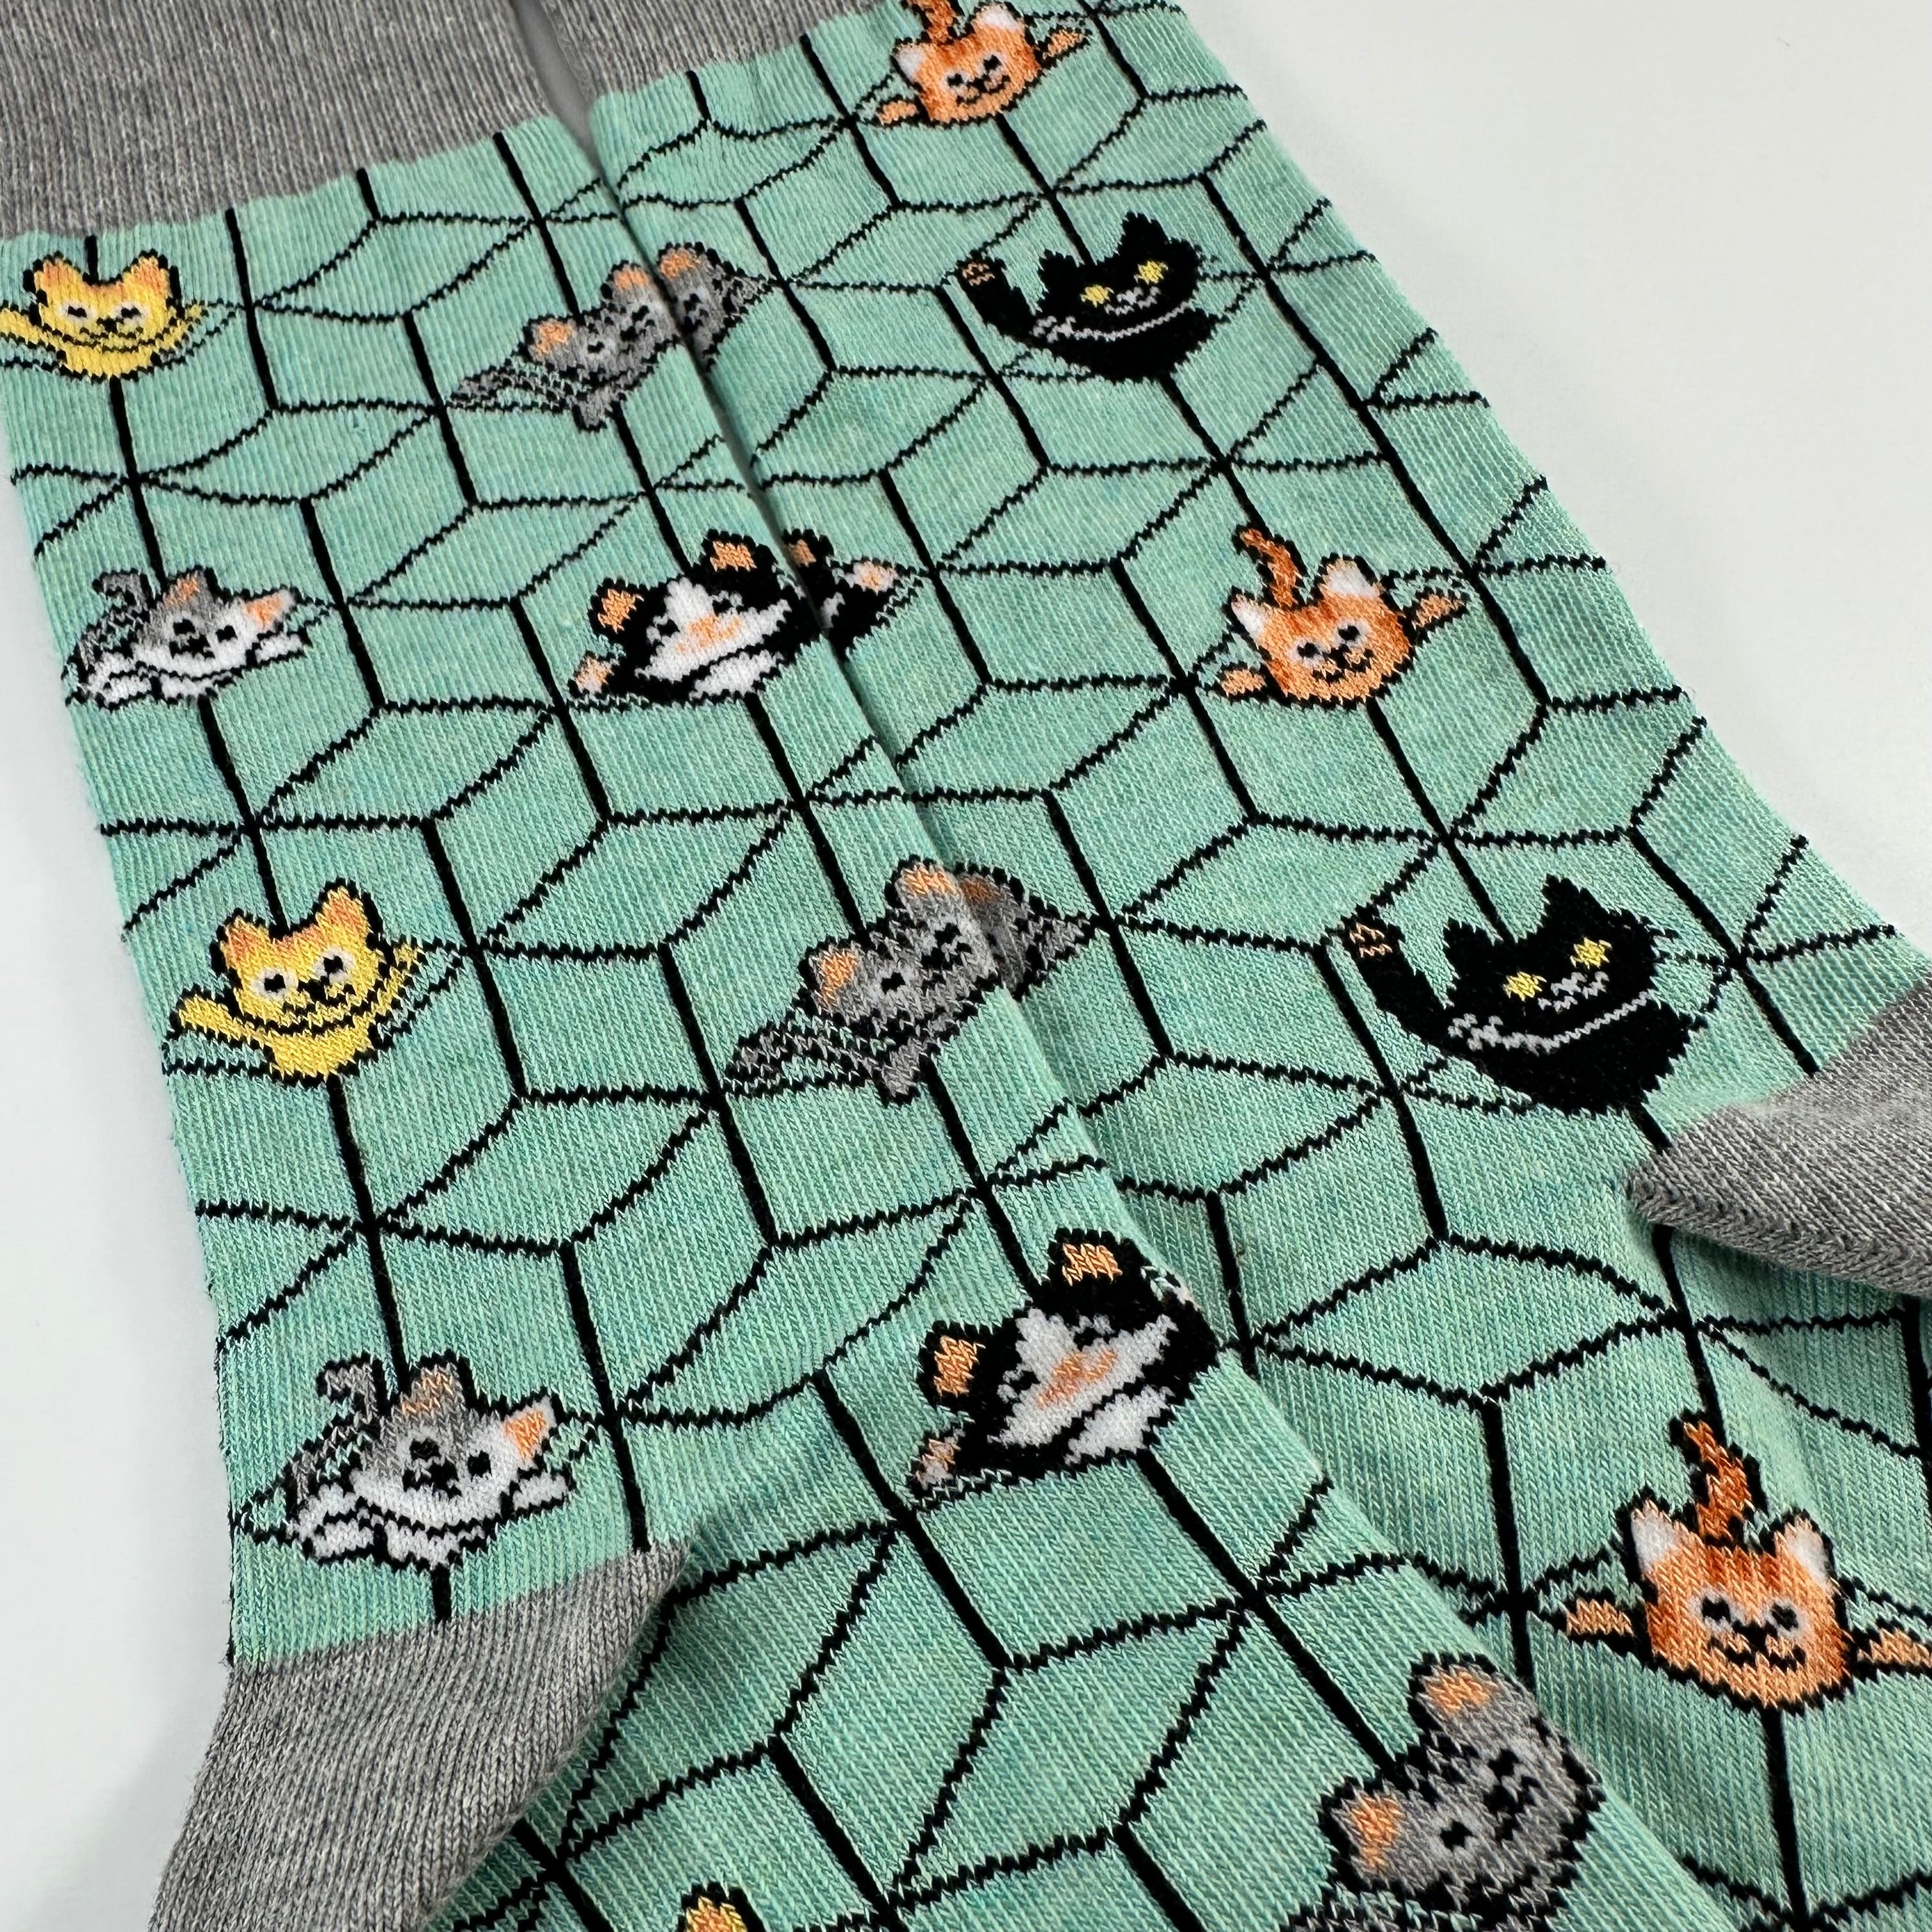 Cats in 3D Socks from the Sock Panda (Adult Small)